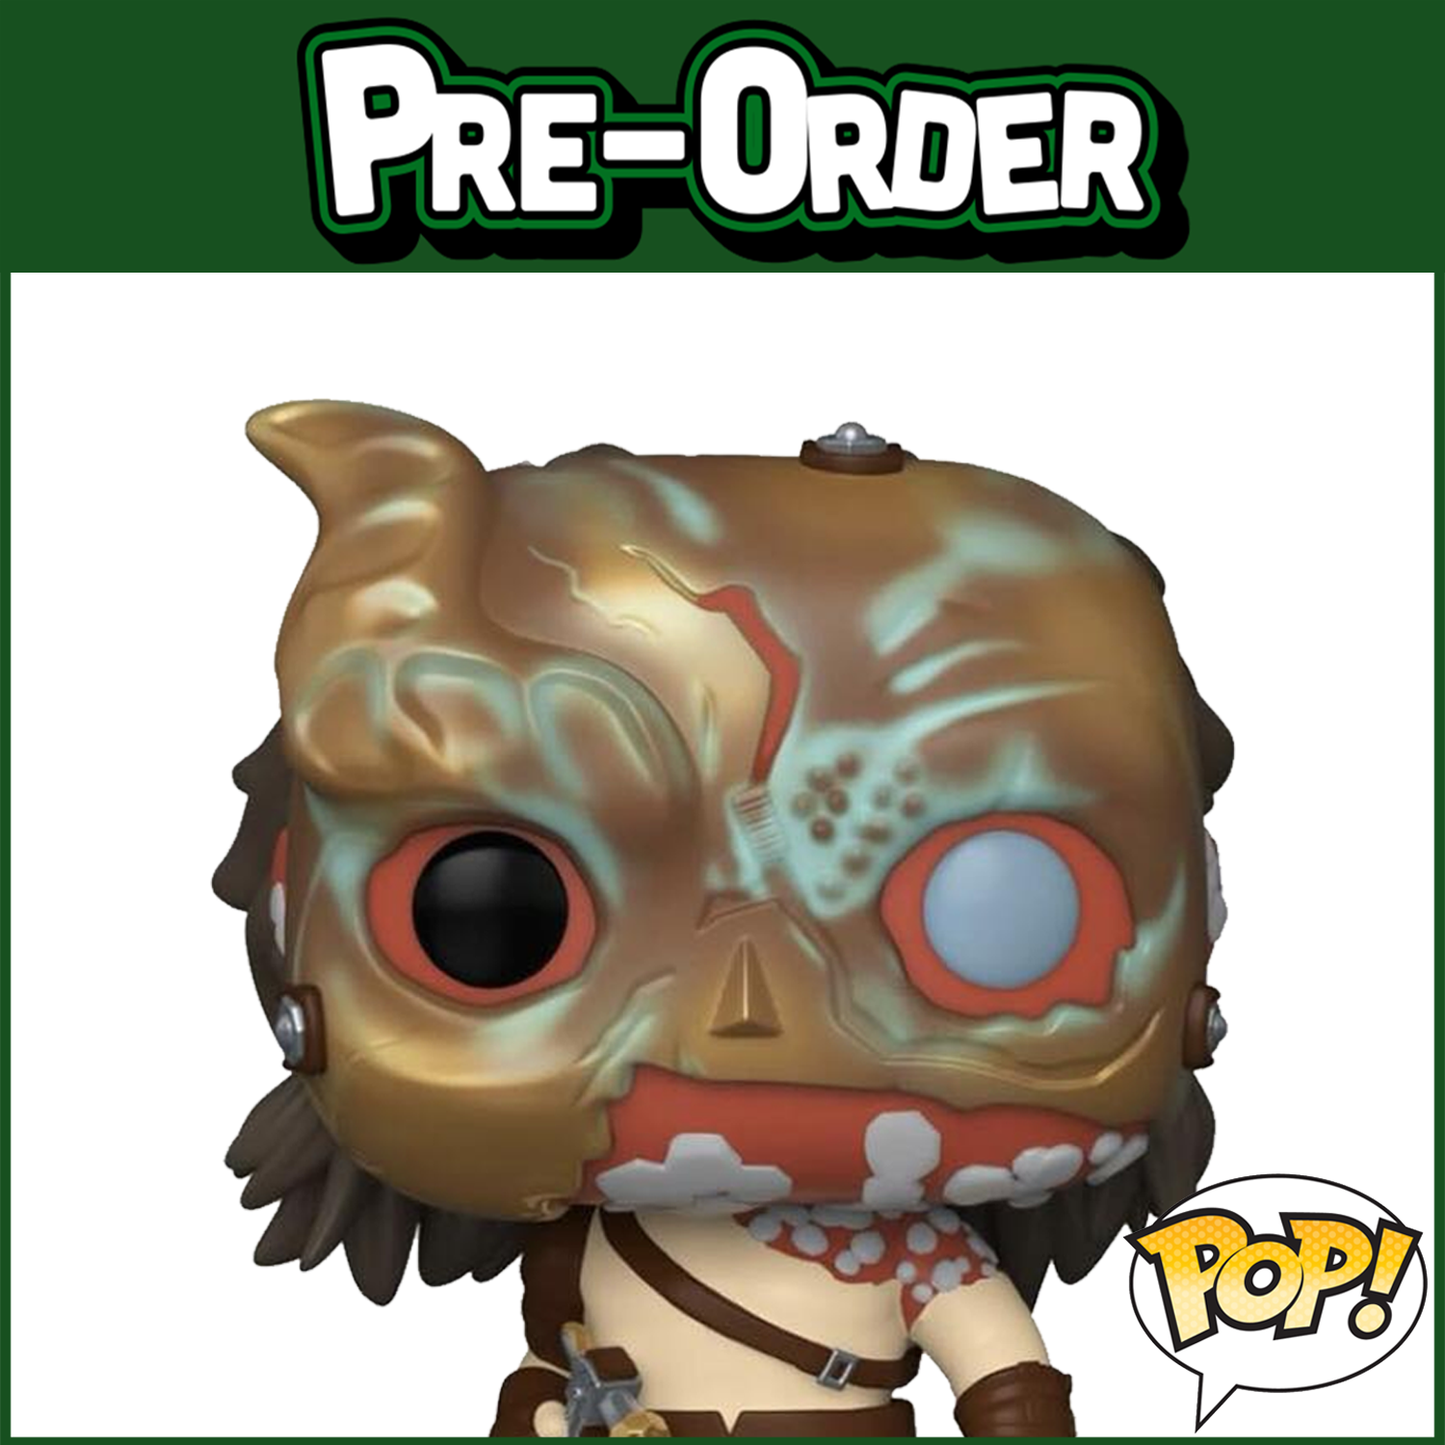 (PRE-ORDER) Funko POP! Television: House of the Dragon - Crabfeeder #14